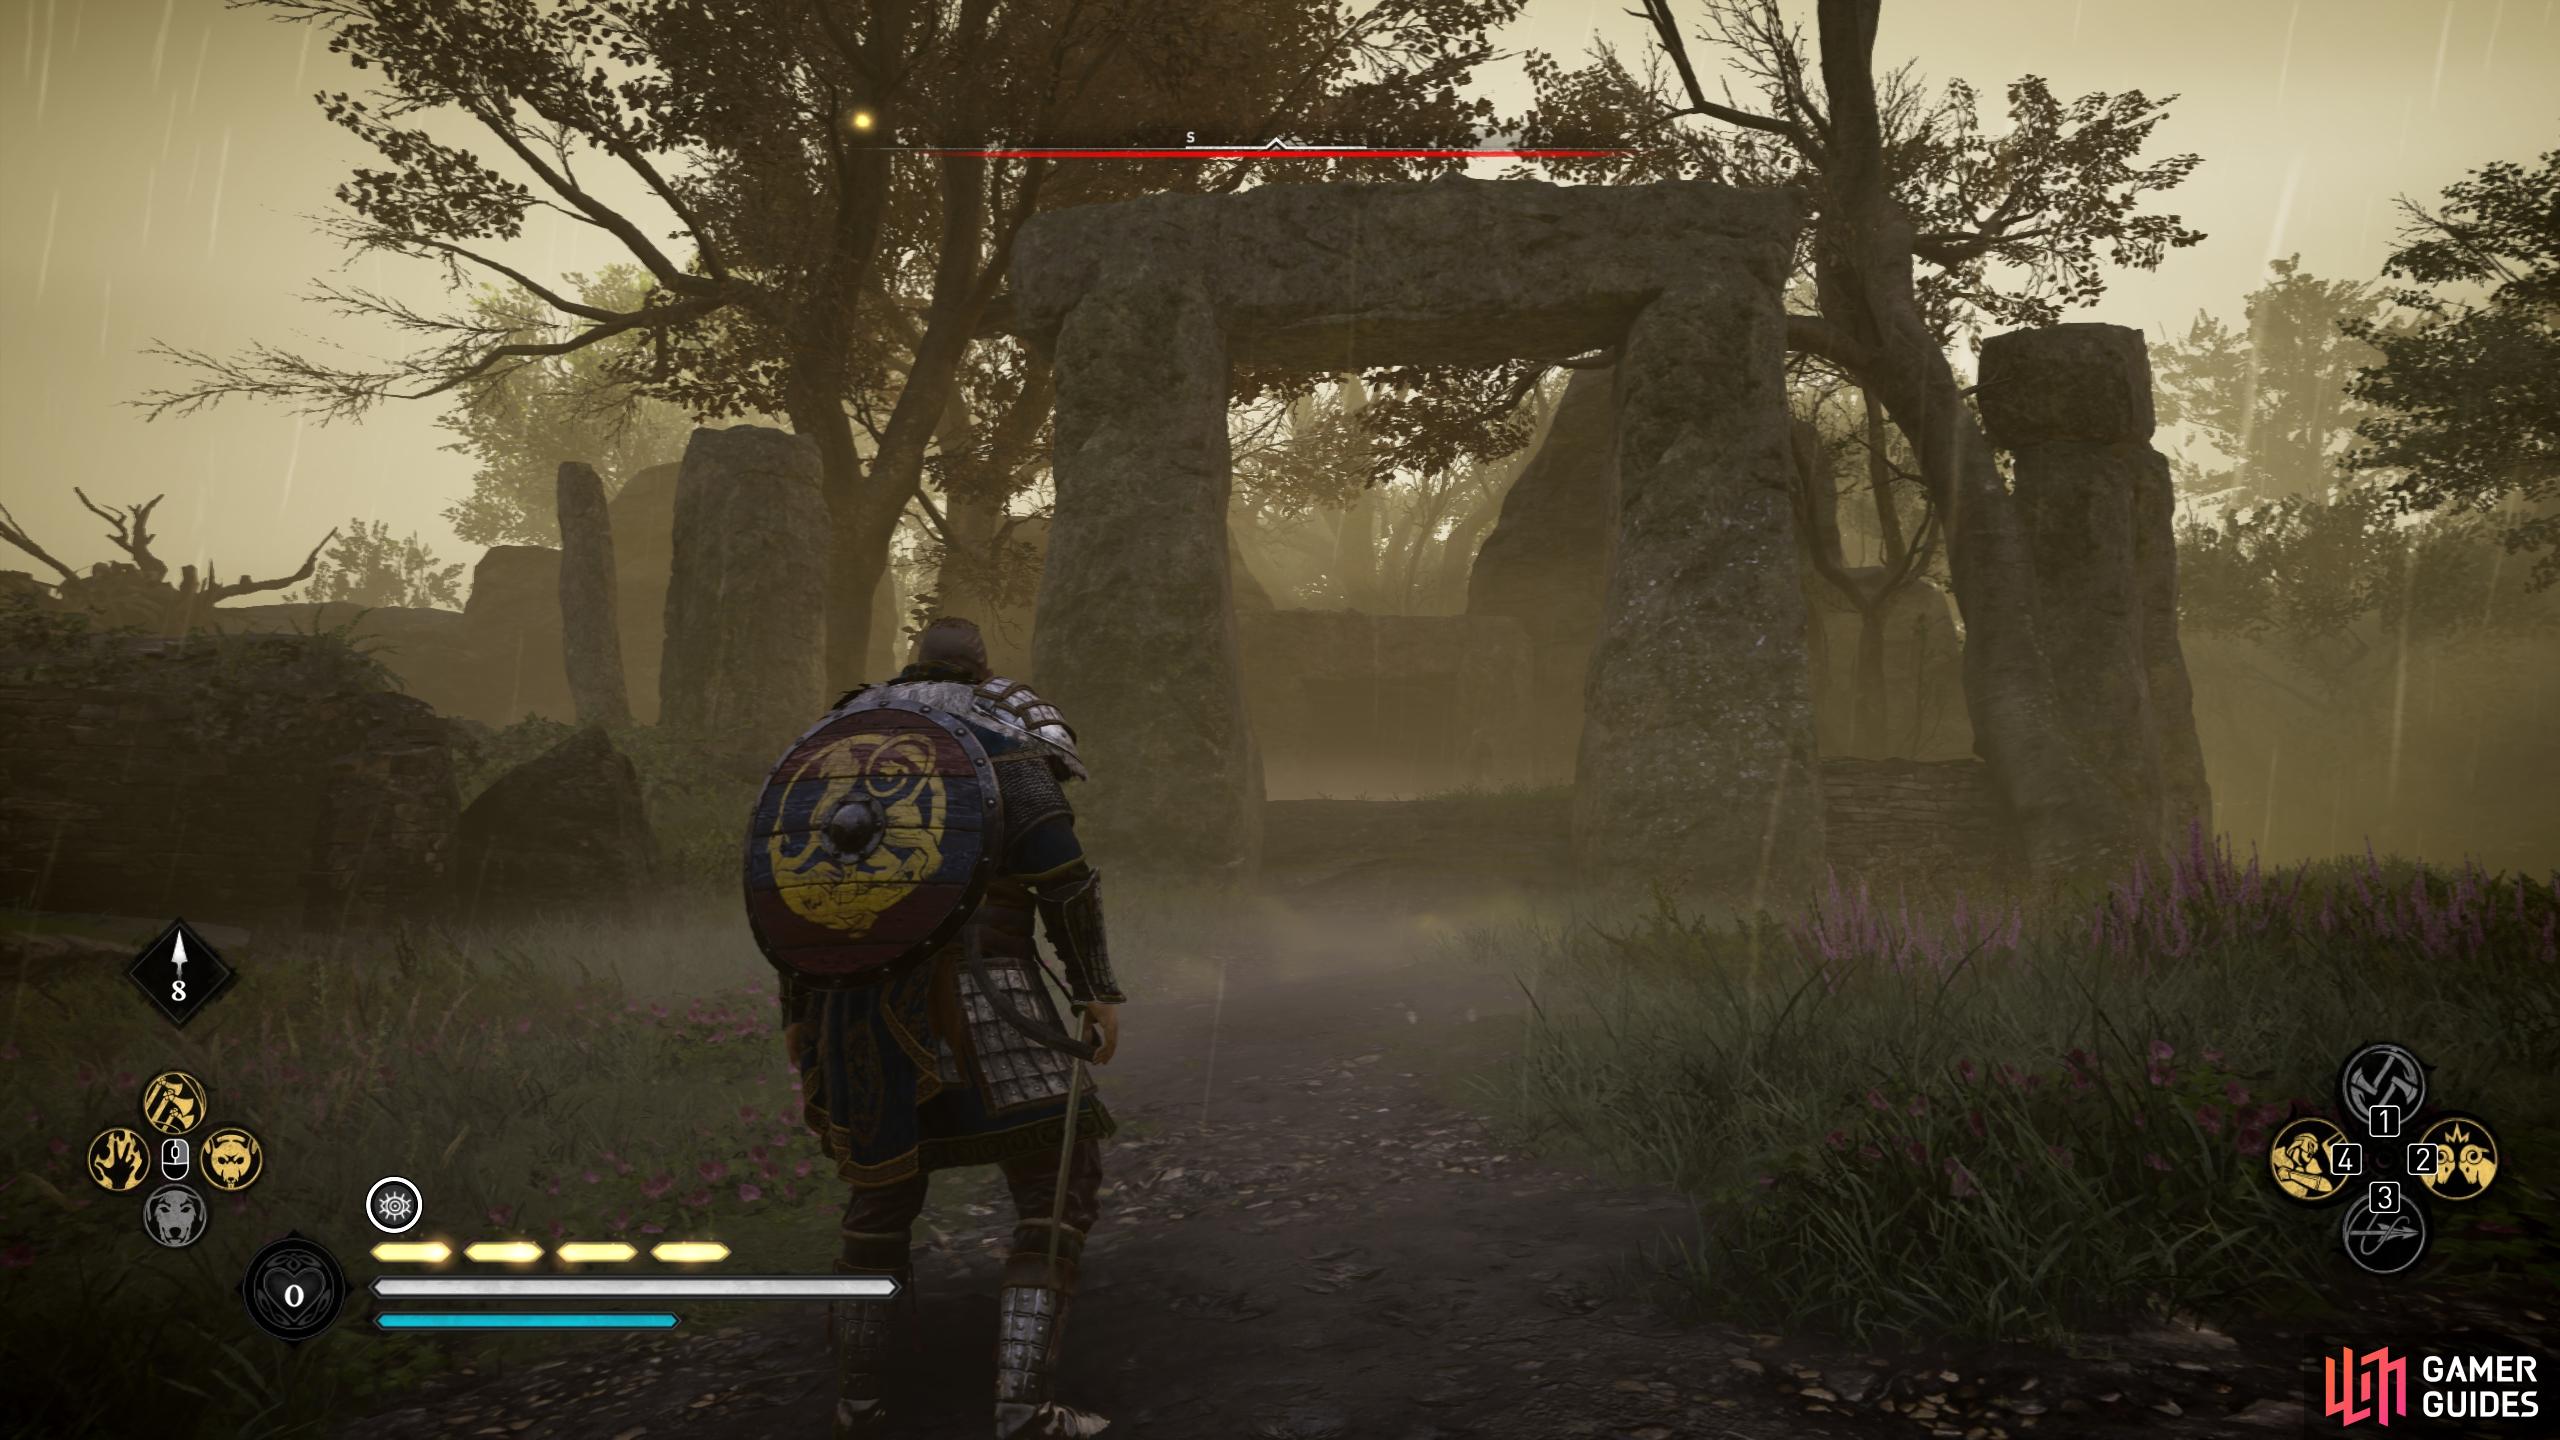 Once you find the ritual stones surrounded by druidic fog, turn south to find the clue in the tombs.